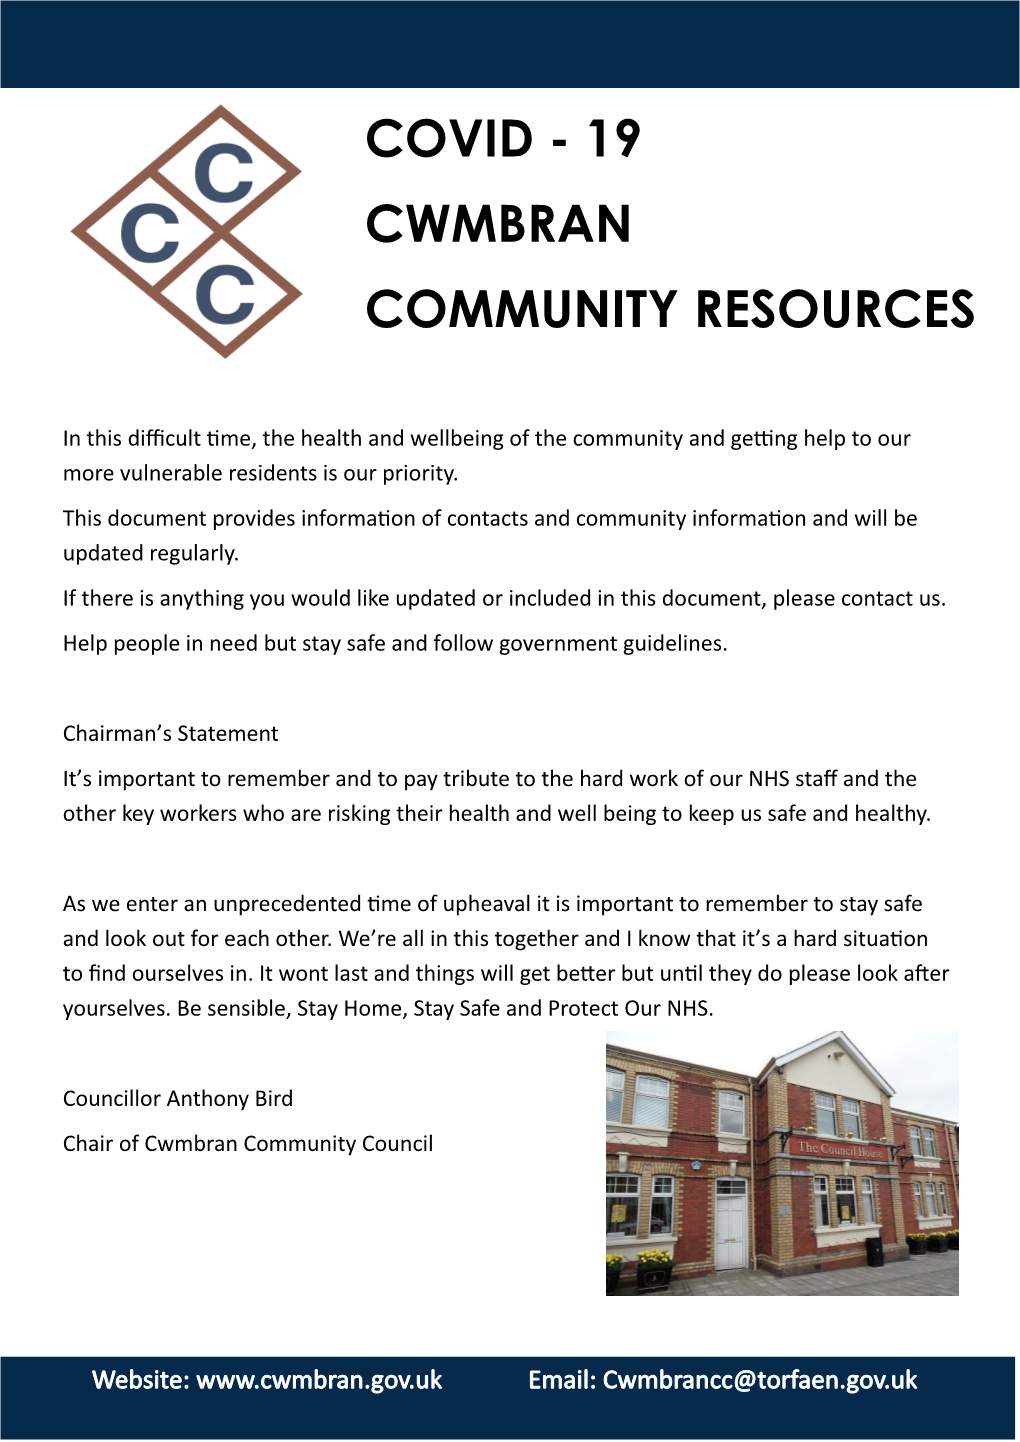 Covid - 19 Cwmbran Community Resources